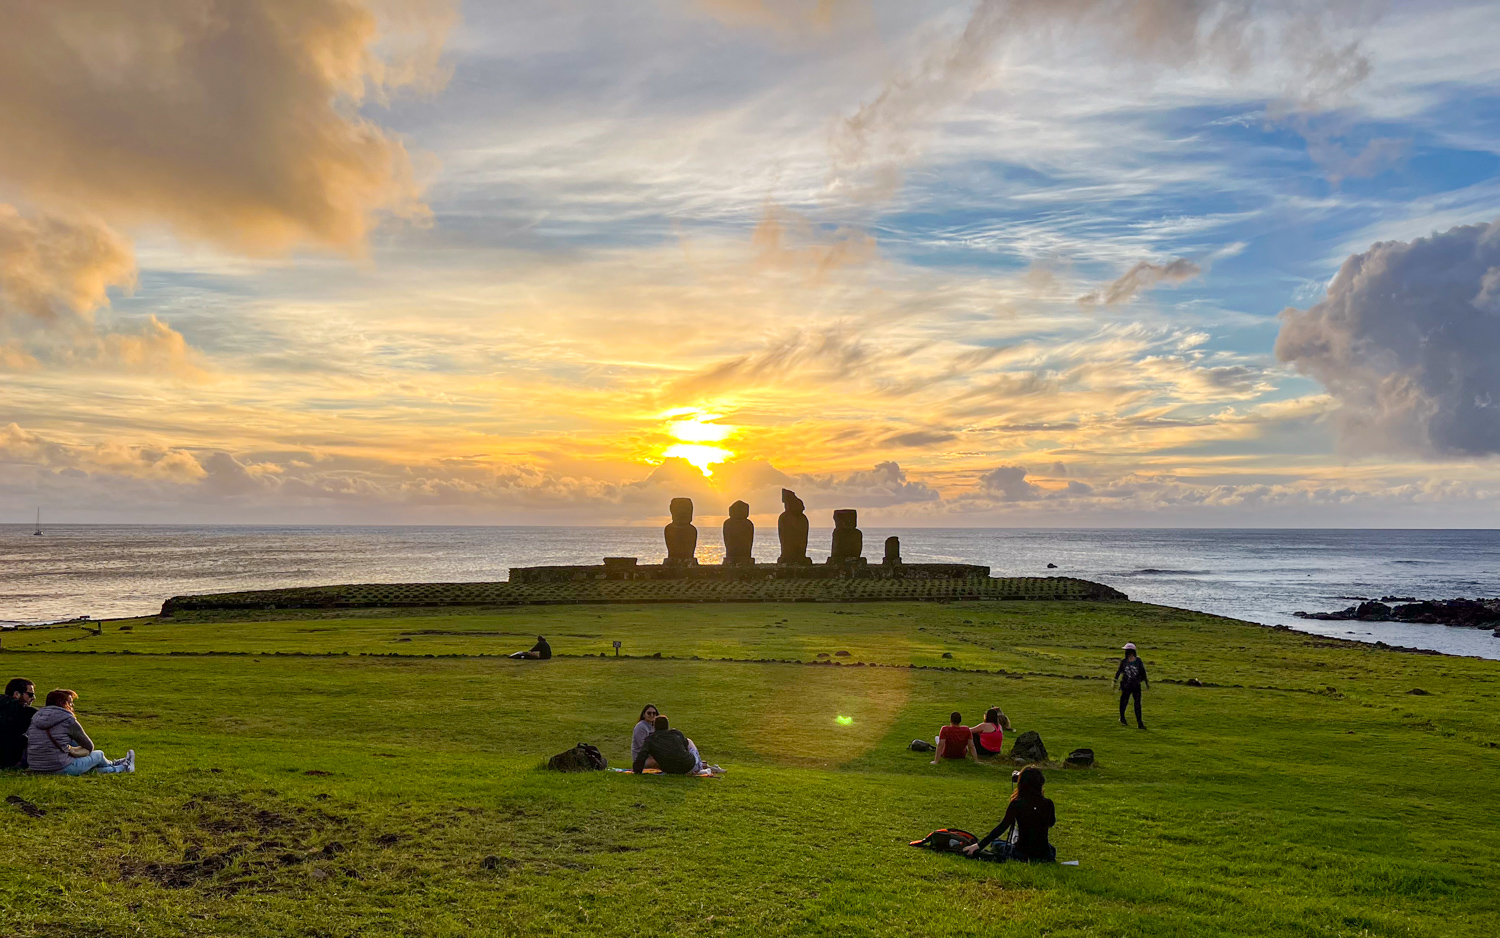 Sunset behind Ahu Vai Uri at the Tahai Ceremonial Complex on Easter Island.